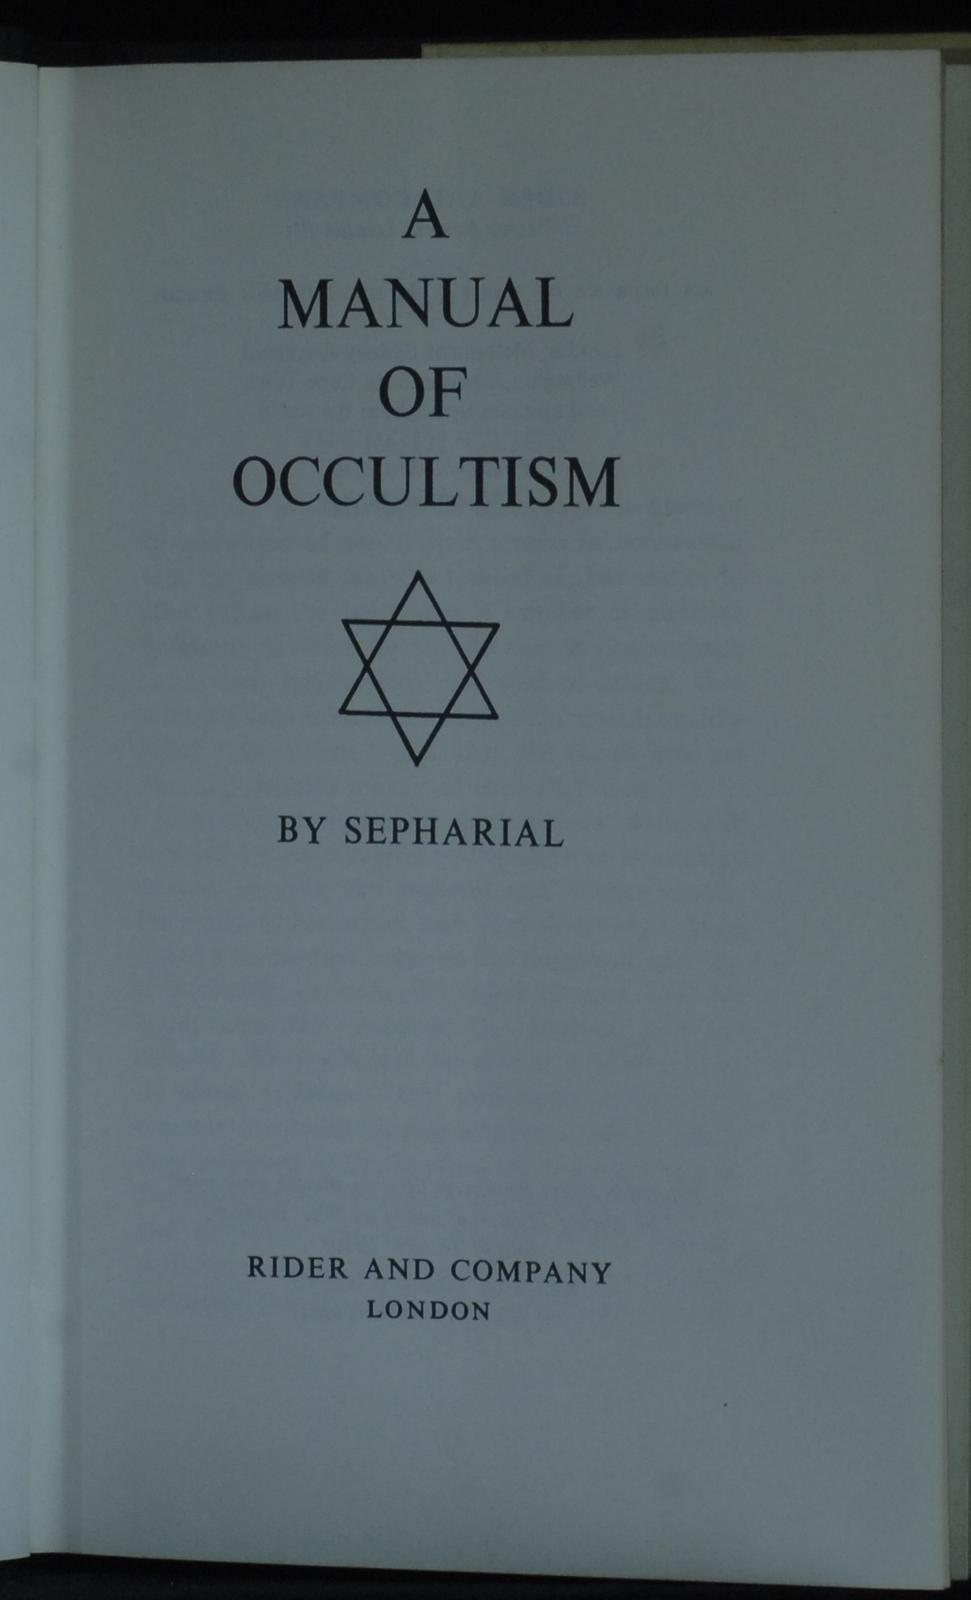 mbb007015d_-_Sepharial_-_A_Manual_Of_Occultism_-_Contains_Illustrations.jpg